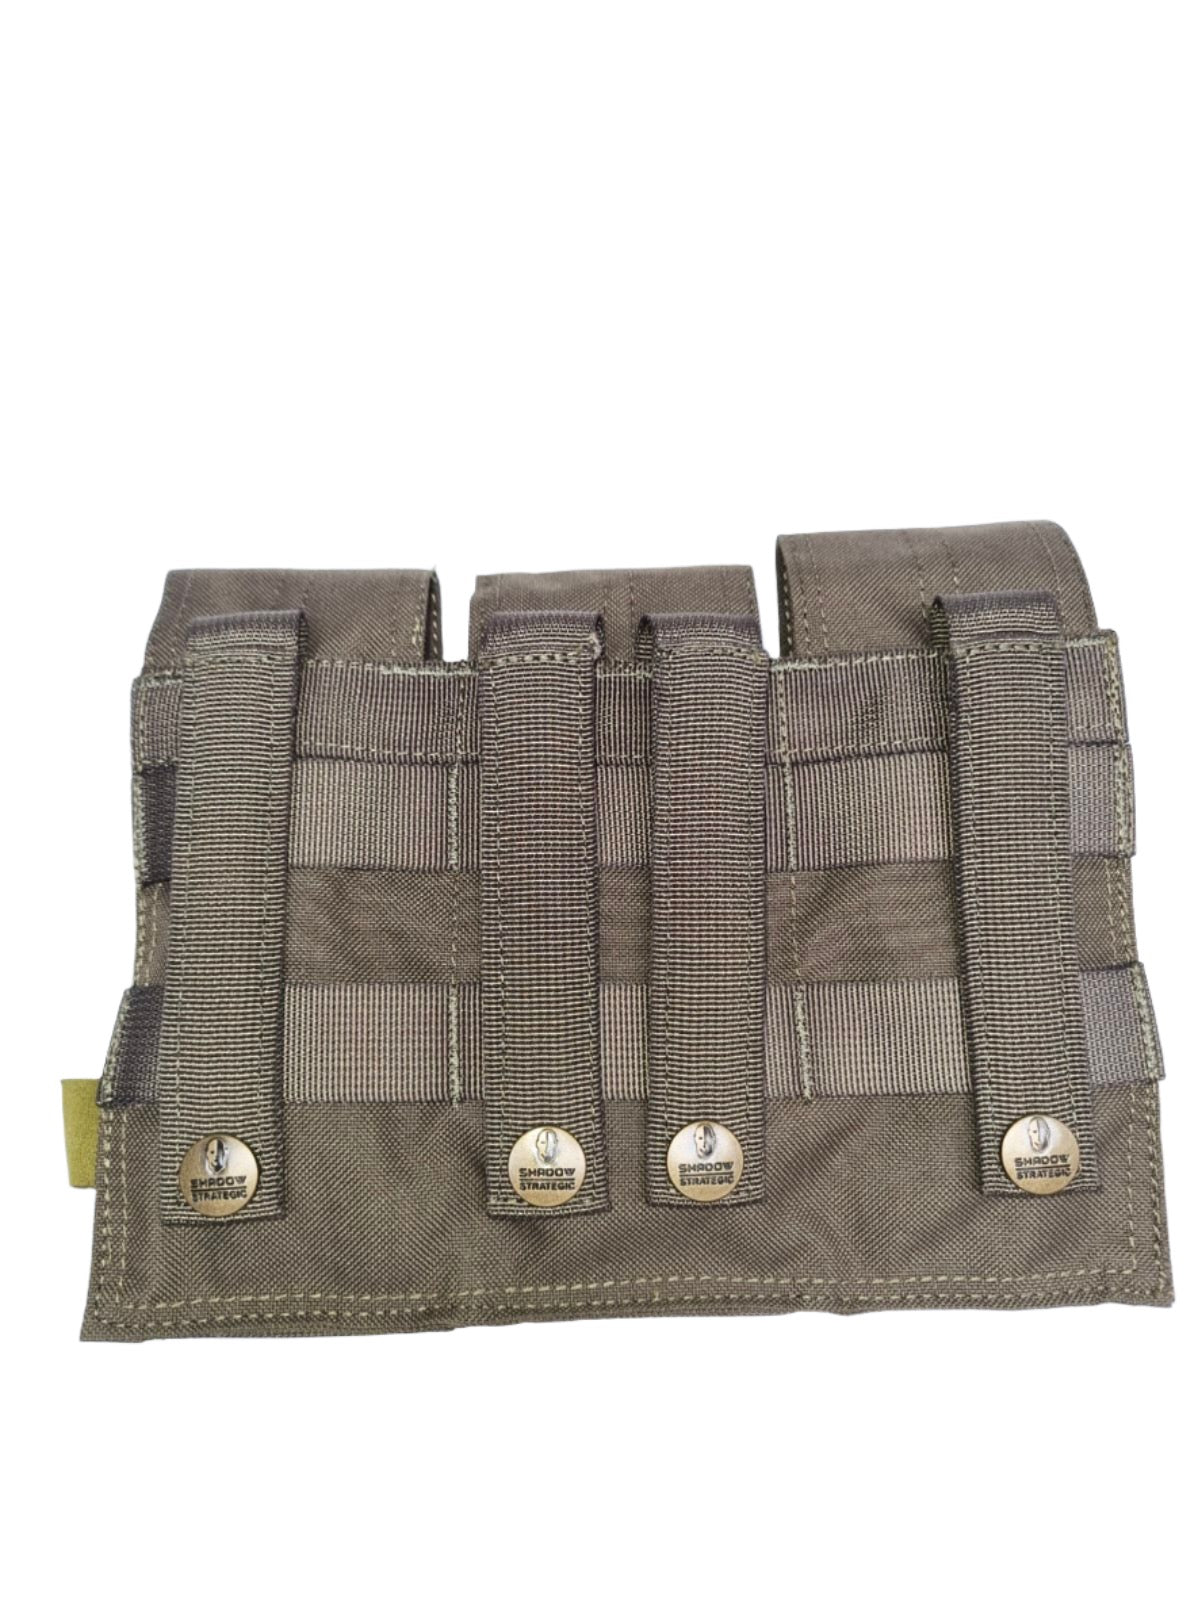 SHS - 23012 TRIPLE M16/M4 x 9 MAG POUCH  OLIVE GREEN